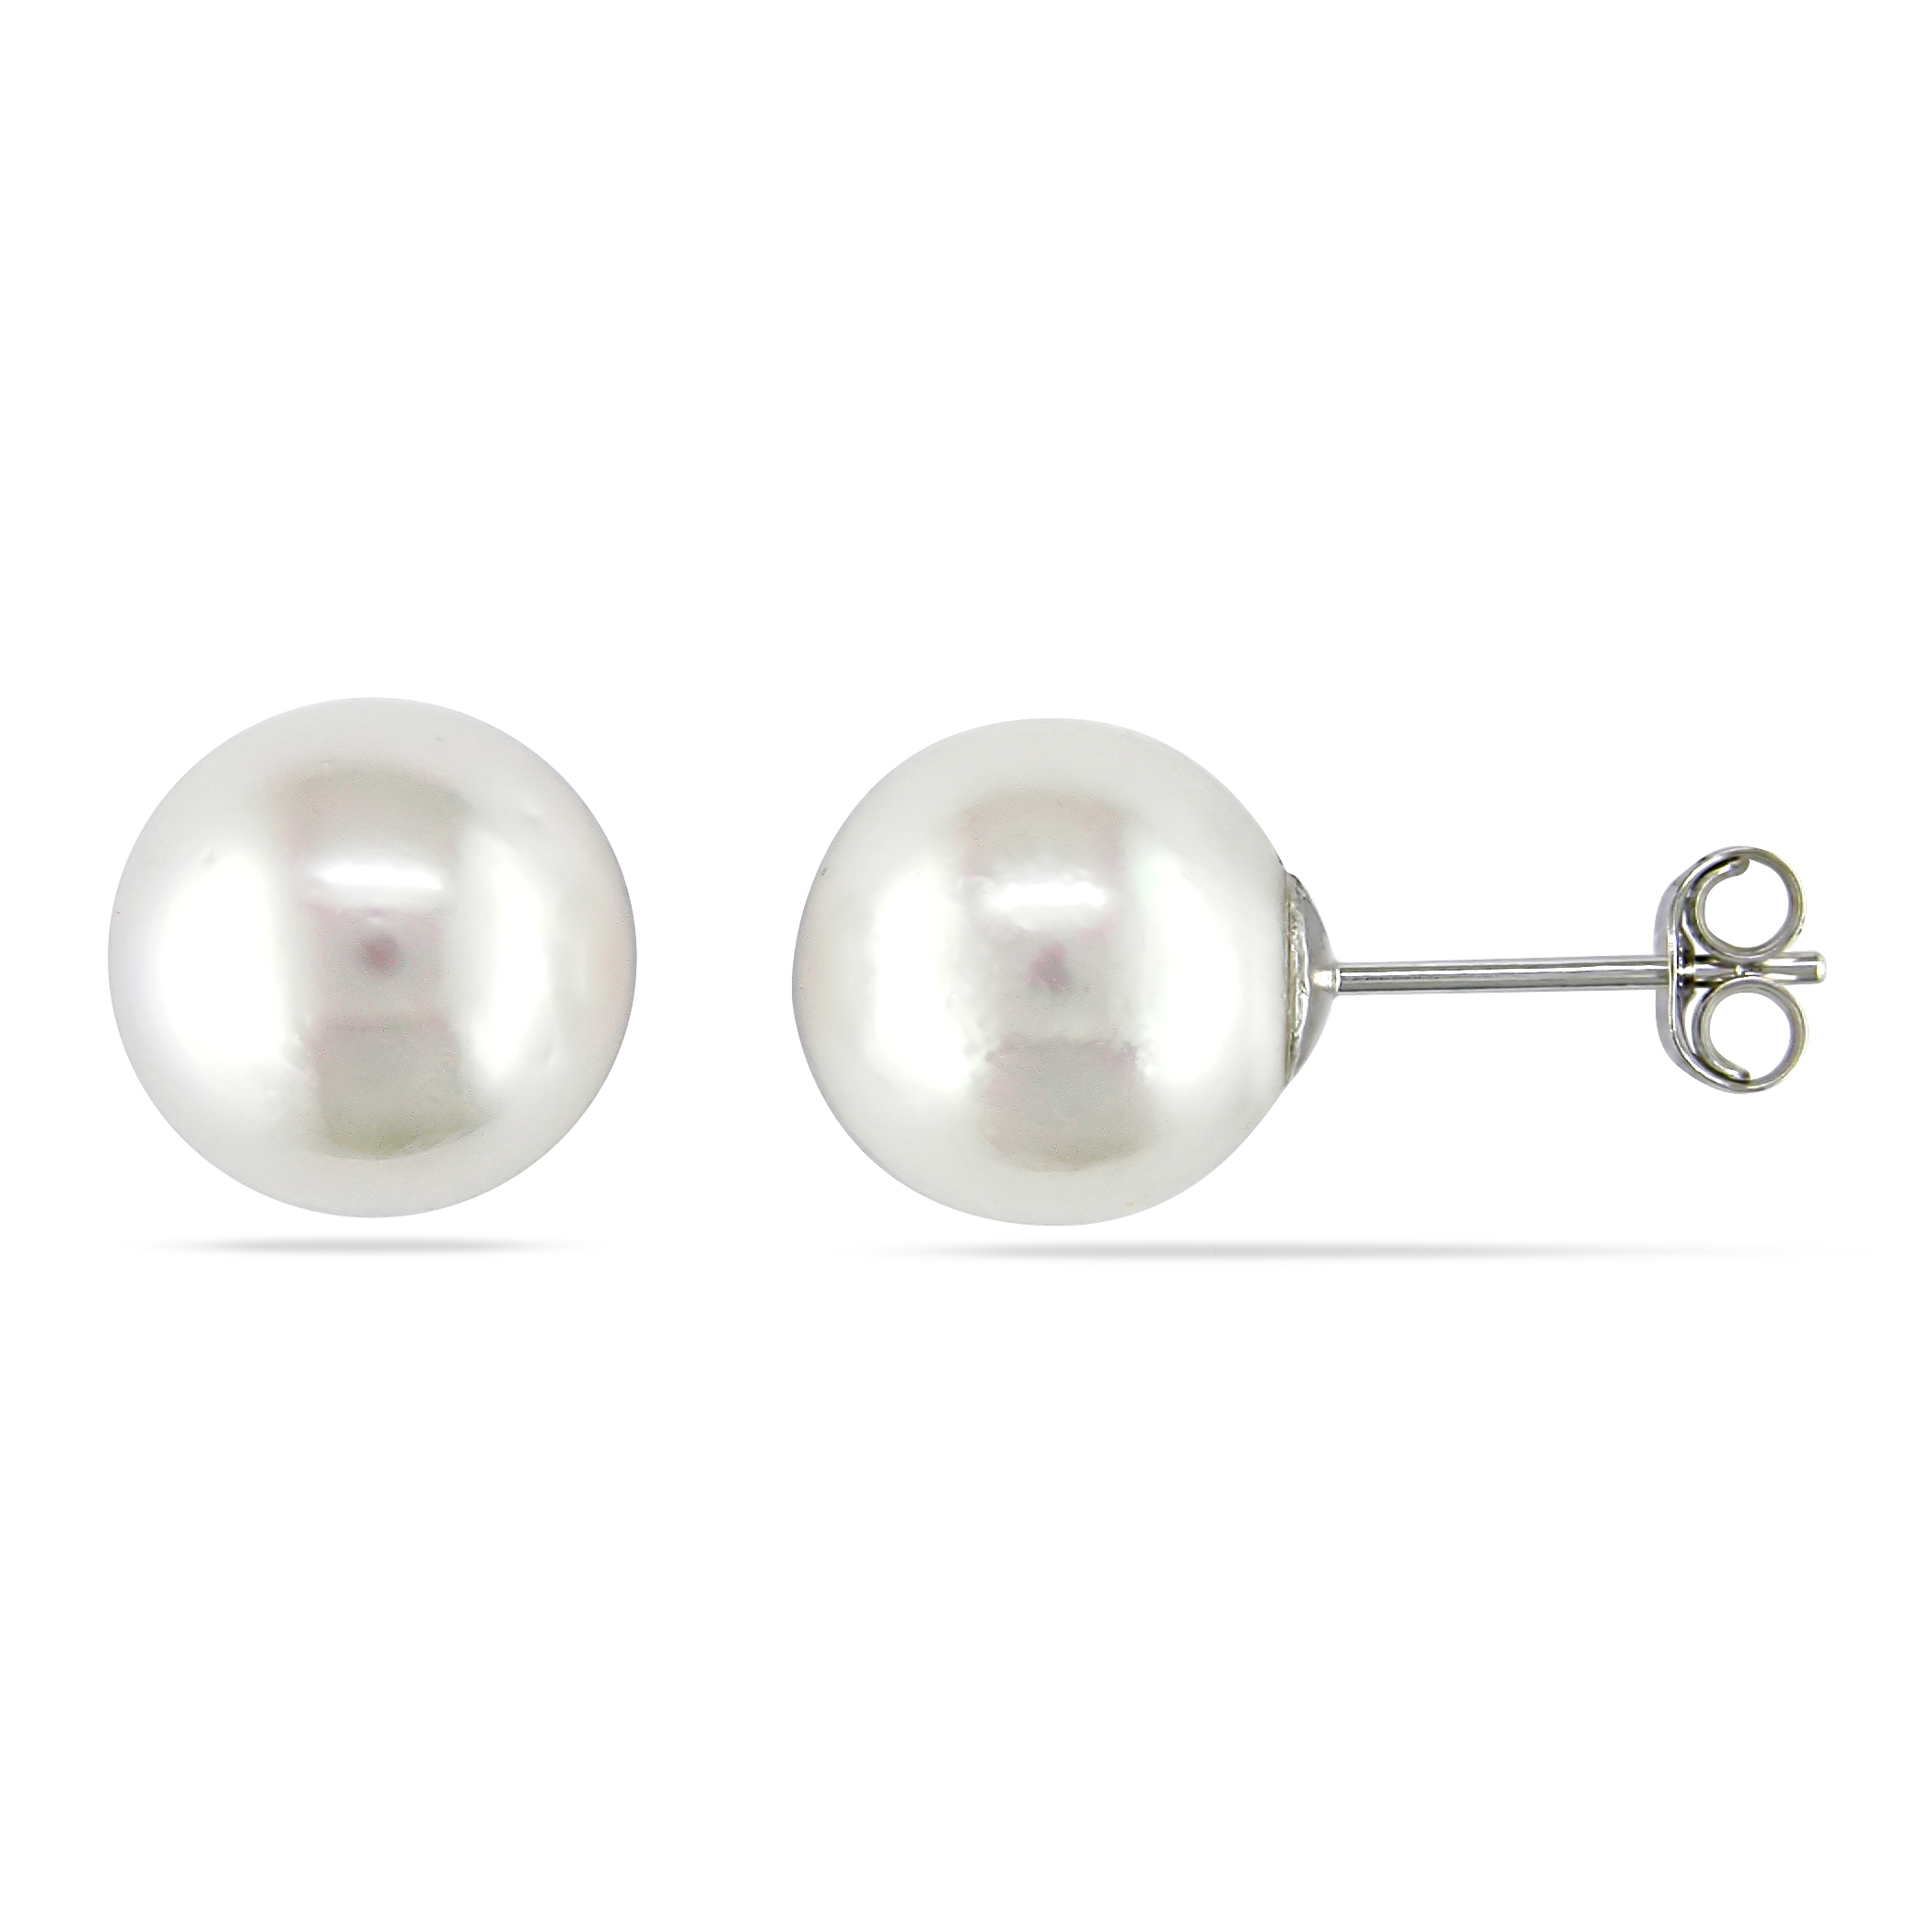 9 - 10 MM South Sea Cultured Pearl Stud Earrings in 14k White Gold